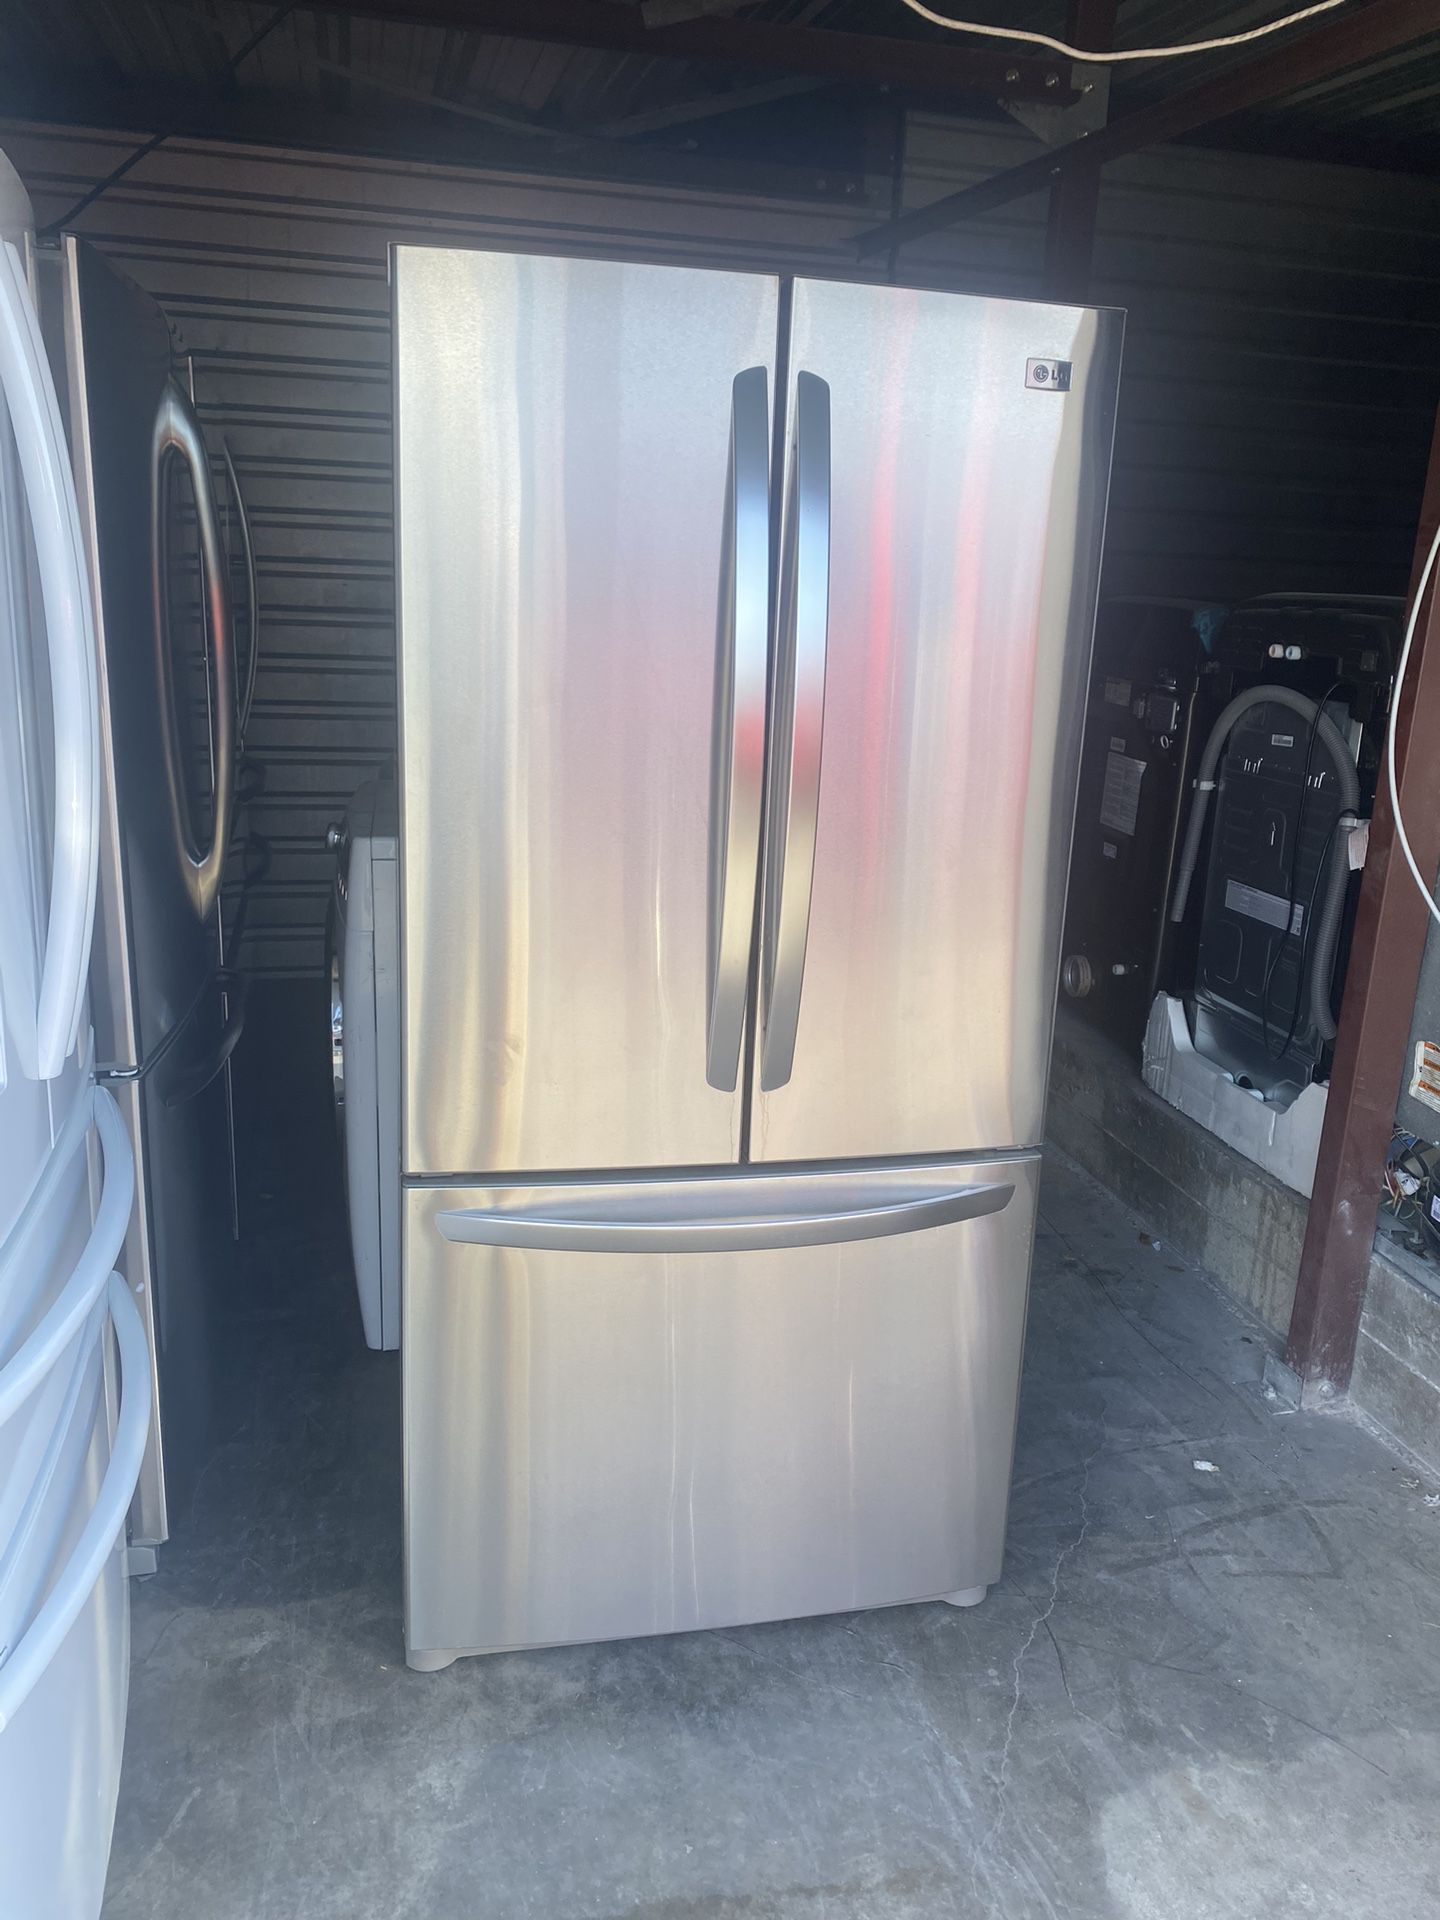 Beautiful LG French Door Refrigerador Stainless Steel With Ice Working Great 3 Months Warranty Free Drop Off 